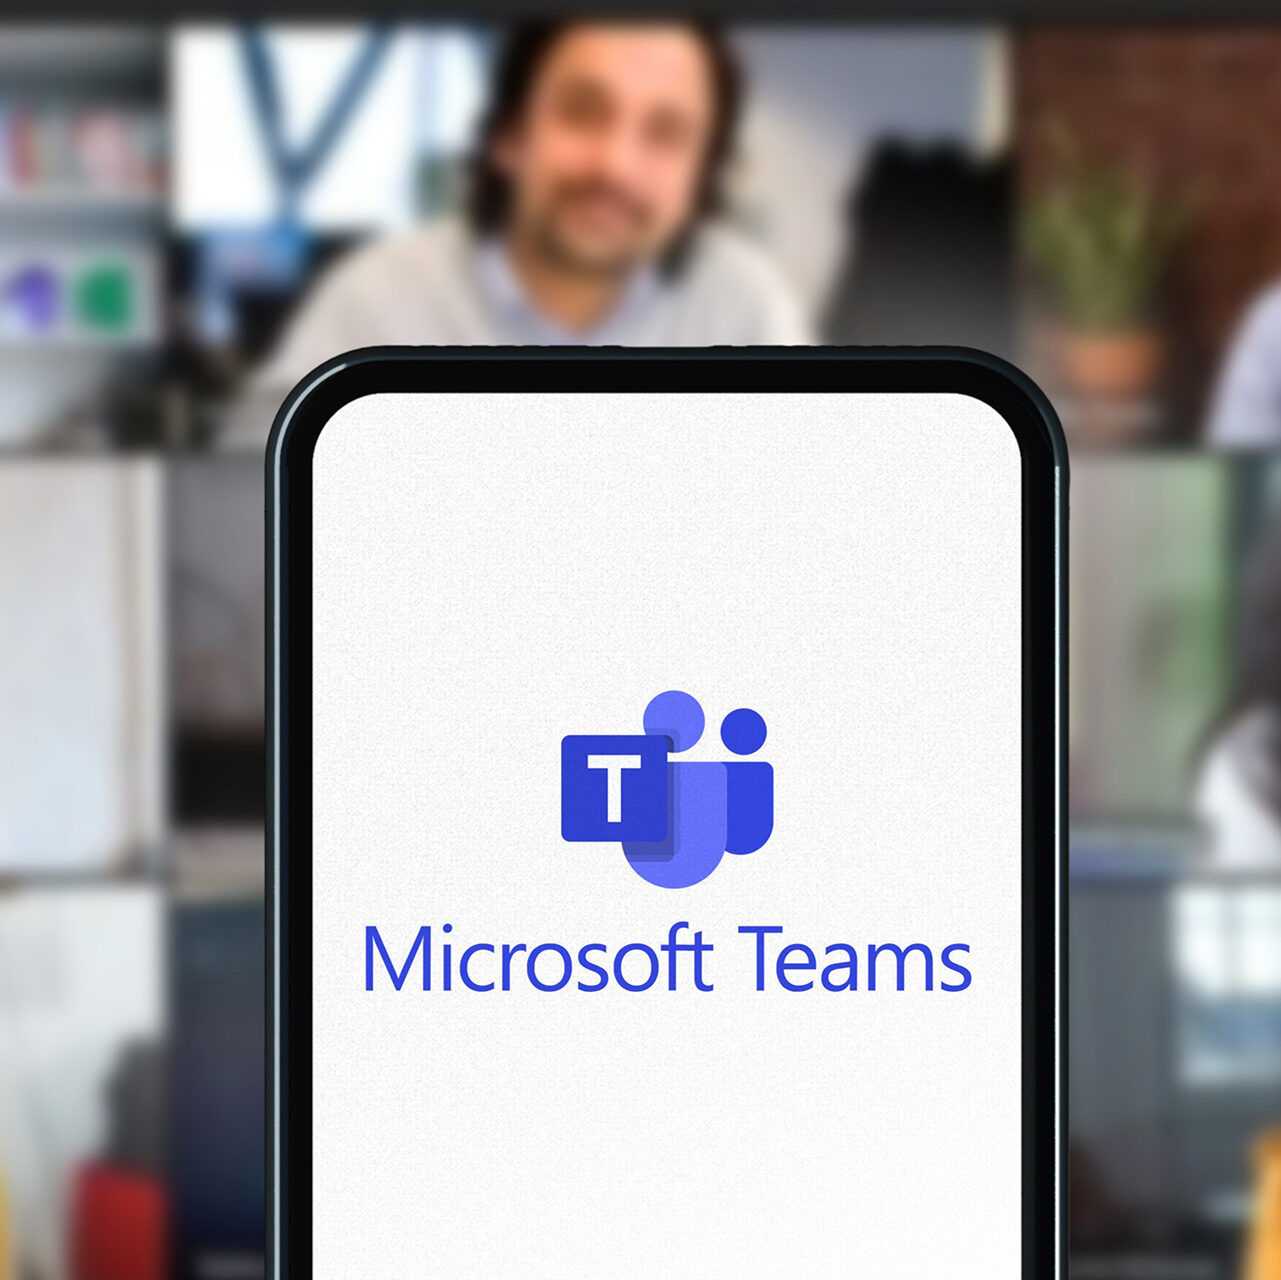 Microsoft Teams is a unified communication and collaboration platform